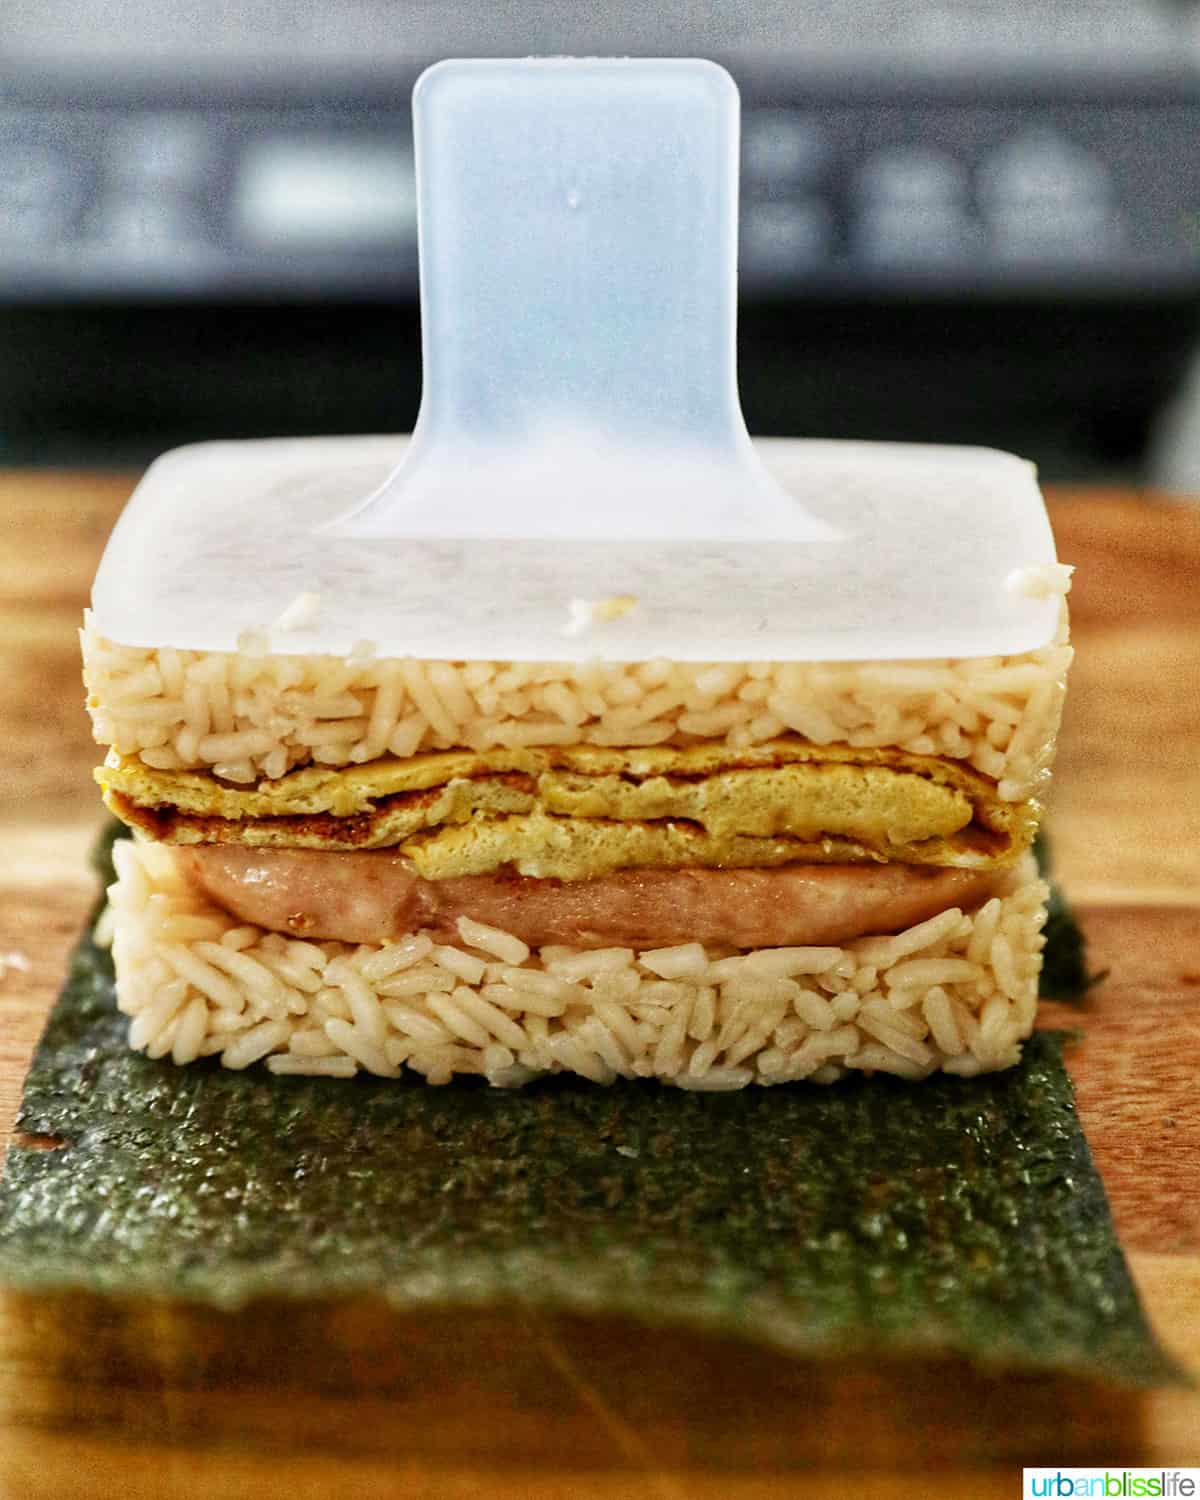 shaped spam musubi with egg